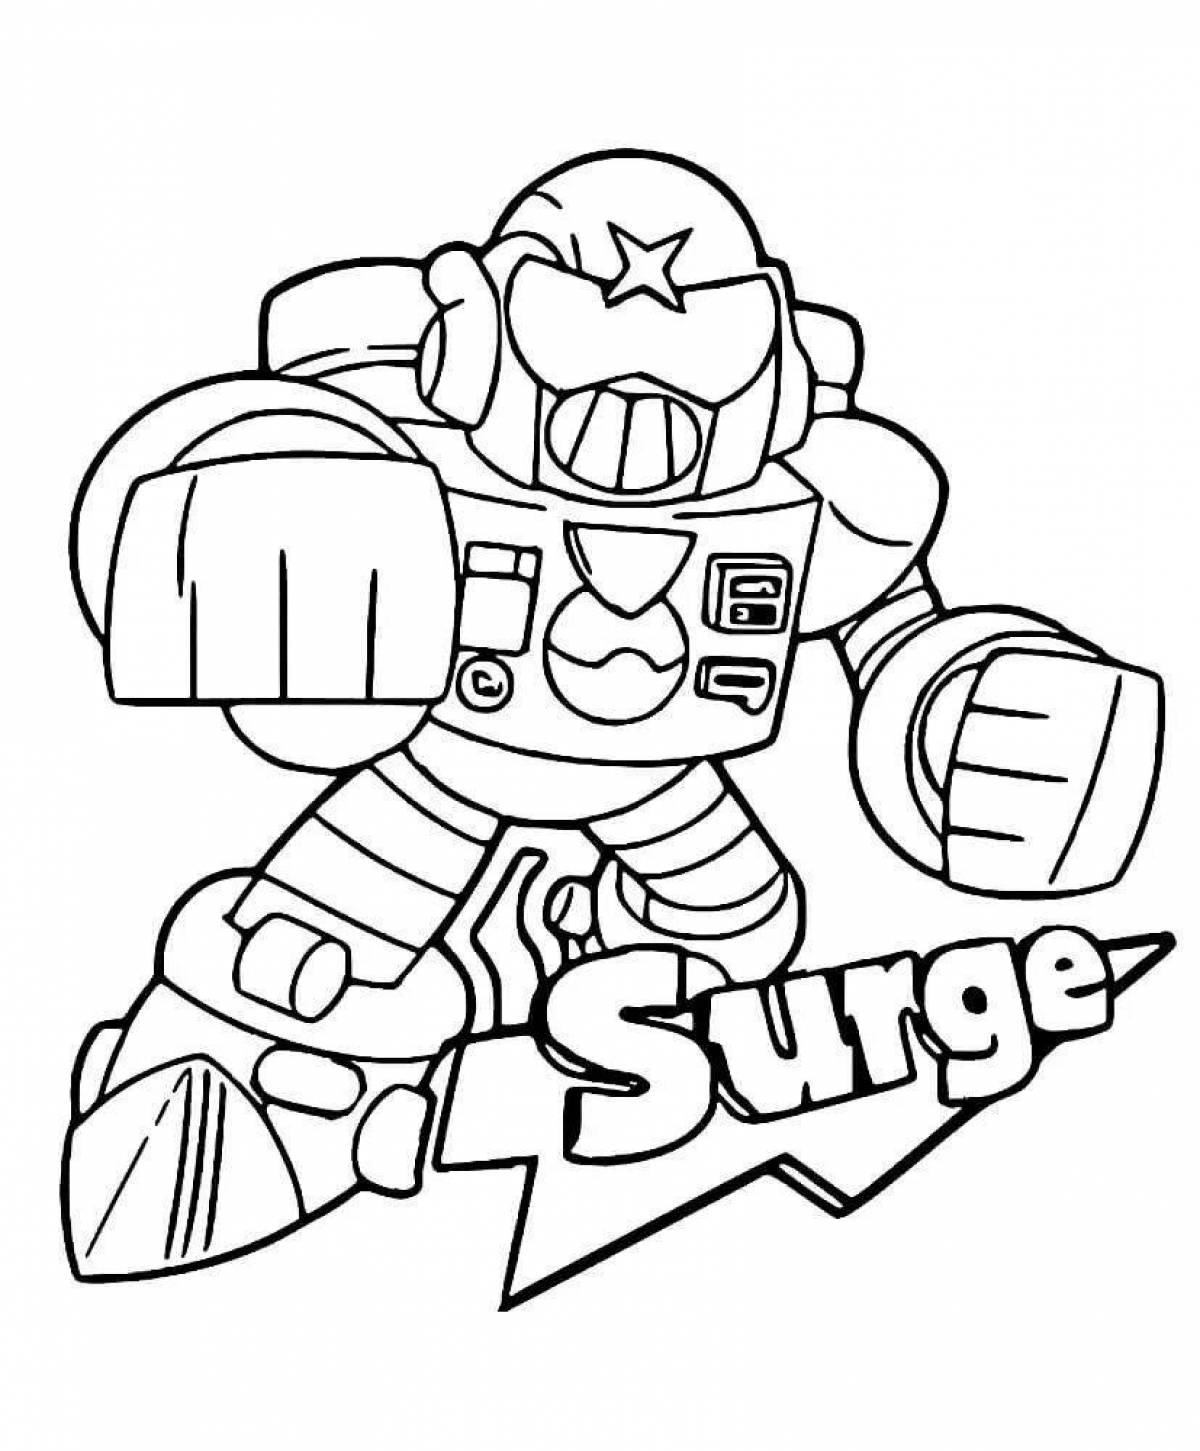 Brawl stars glitter coloring pages for boys